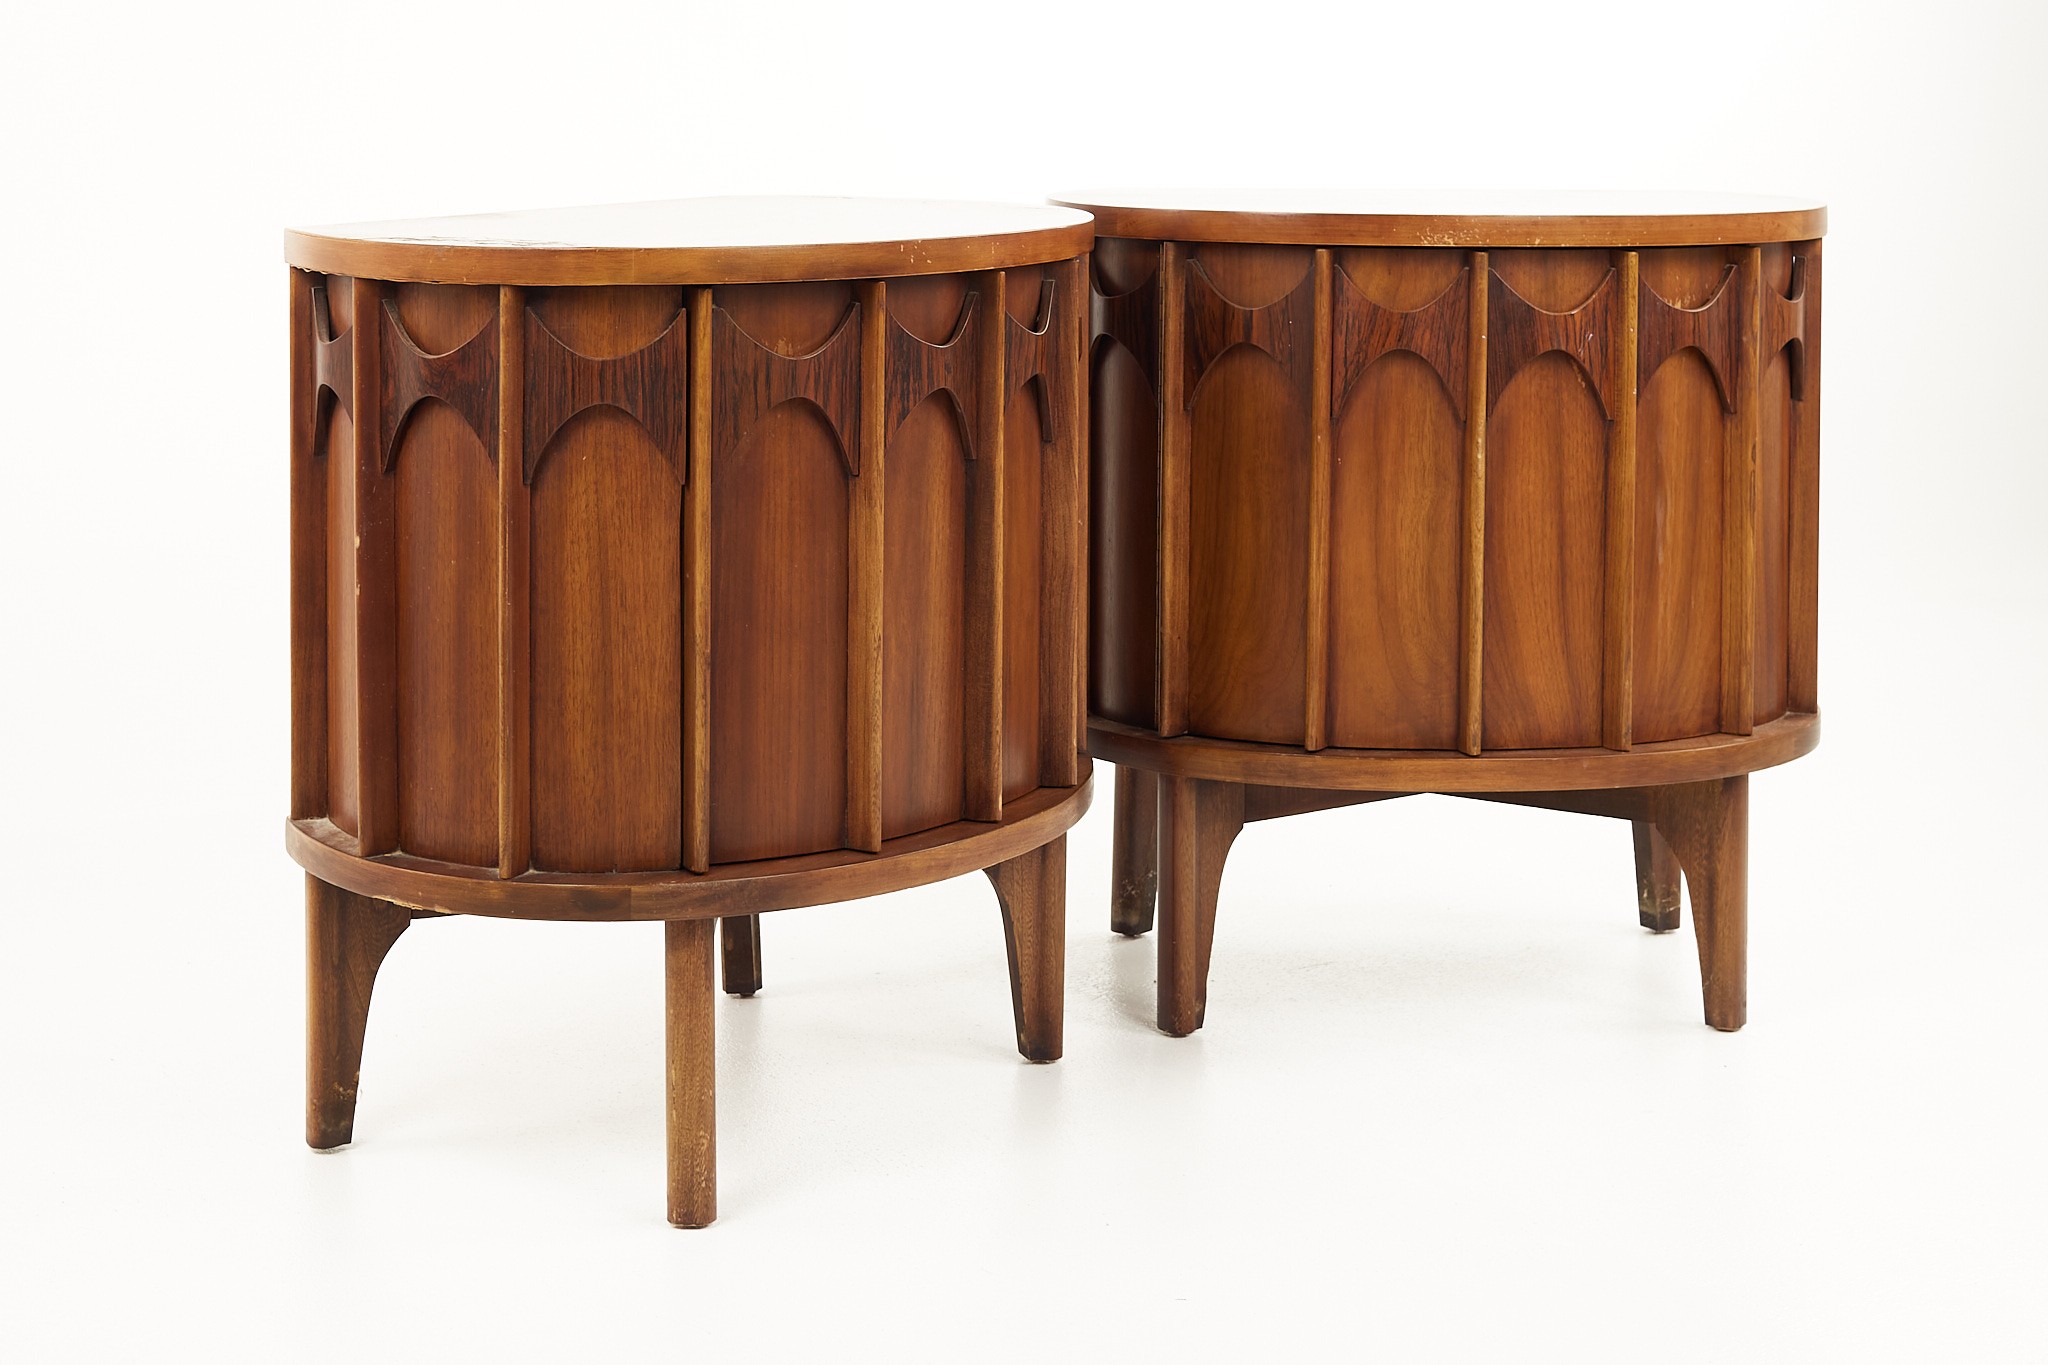 Kent Coffey Perspecta Mid Century Semi Round Walnut and Rosewood Nightstands - a Pair